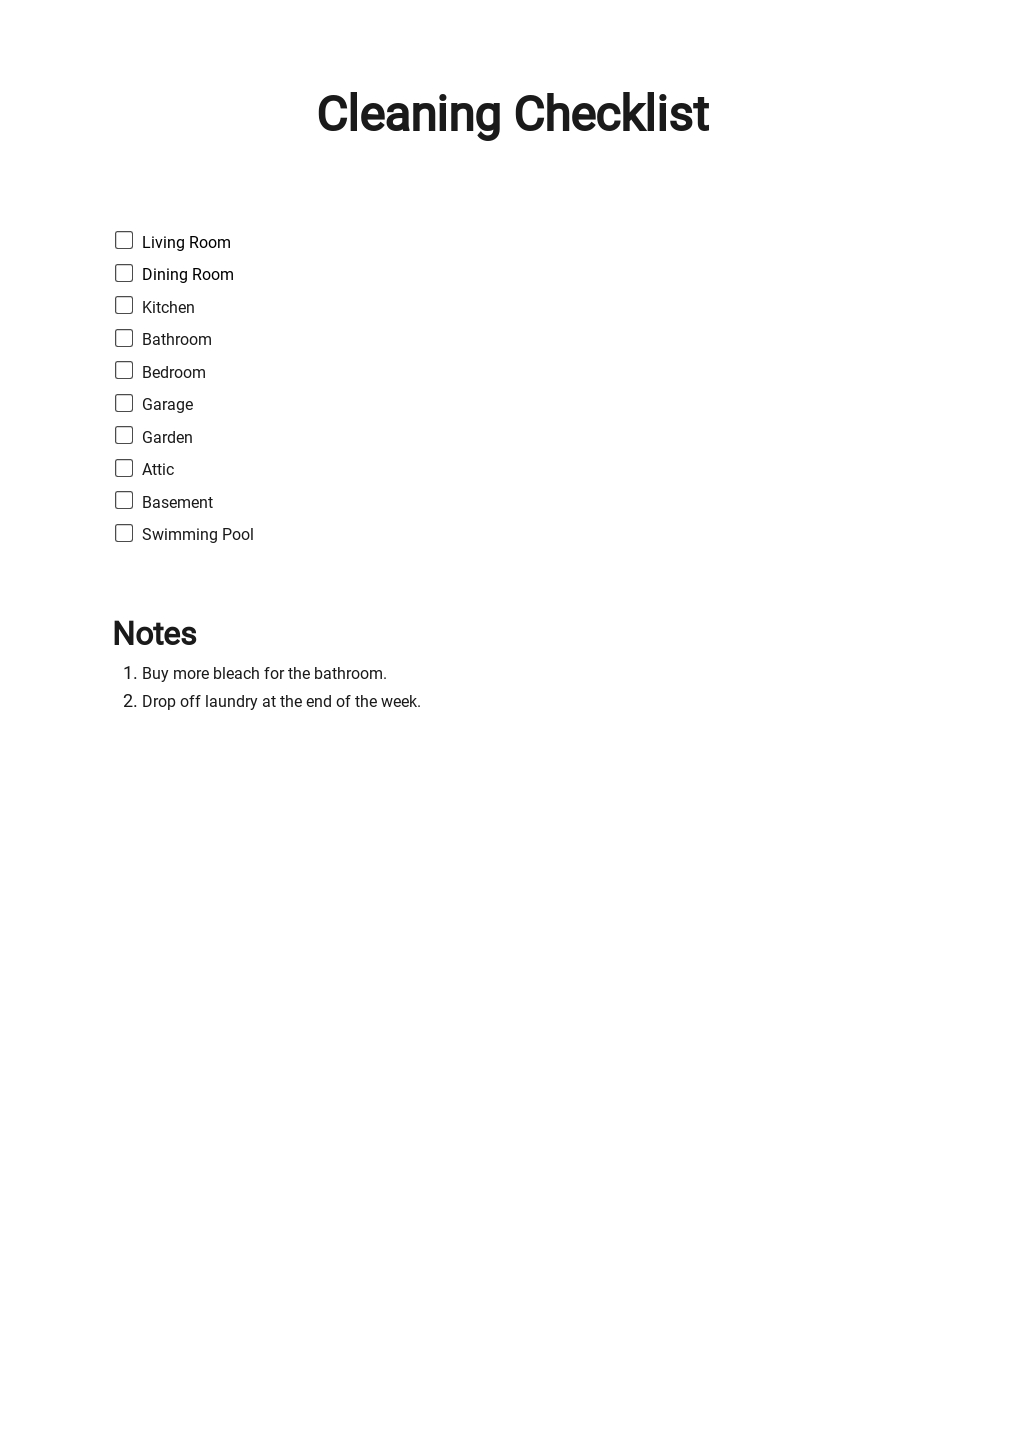 Cleaning Checklist Template.jpe